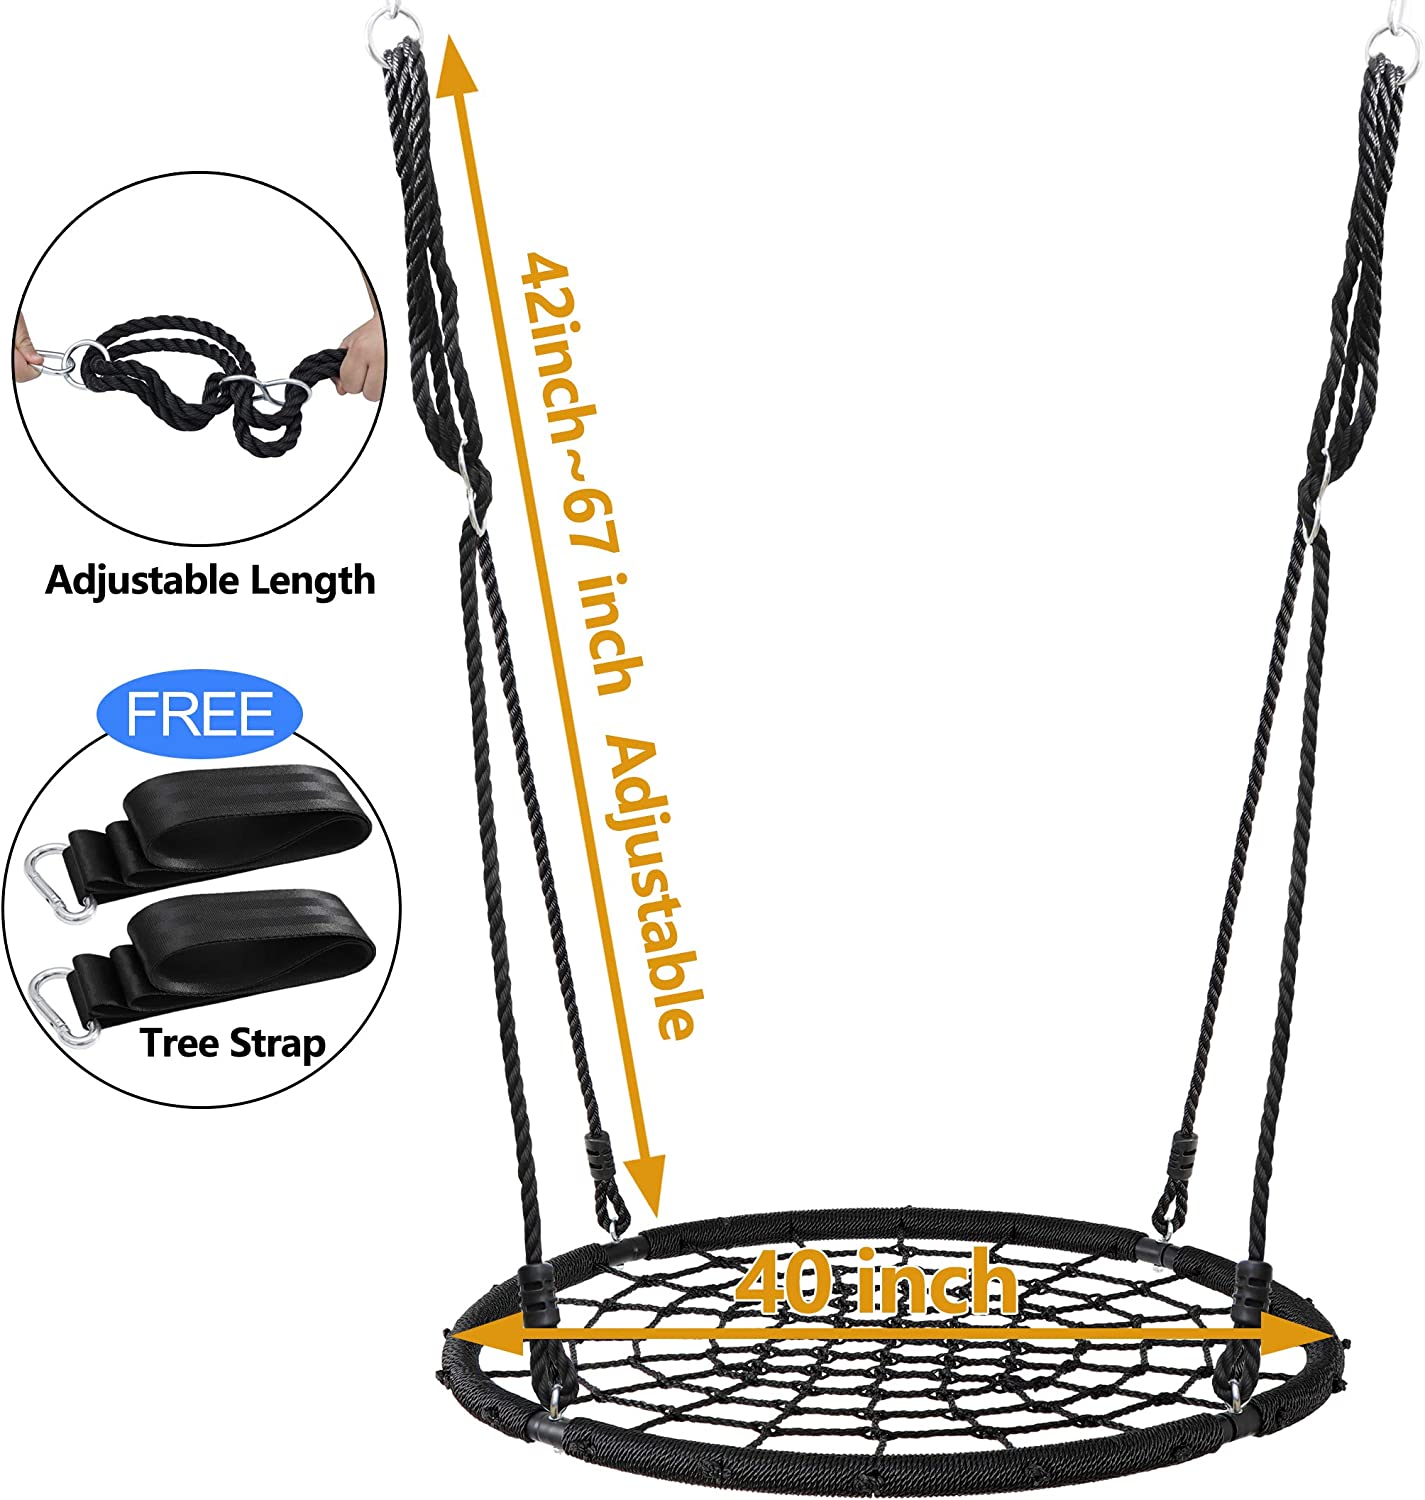 40 Inch Spider Web Swing Tree Swing for Kids Round Swing Platform for Outdoor, Playground, Rope Swing for Tree or Swing Set, 2 Free Hanging Straps and Carabiners